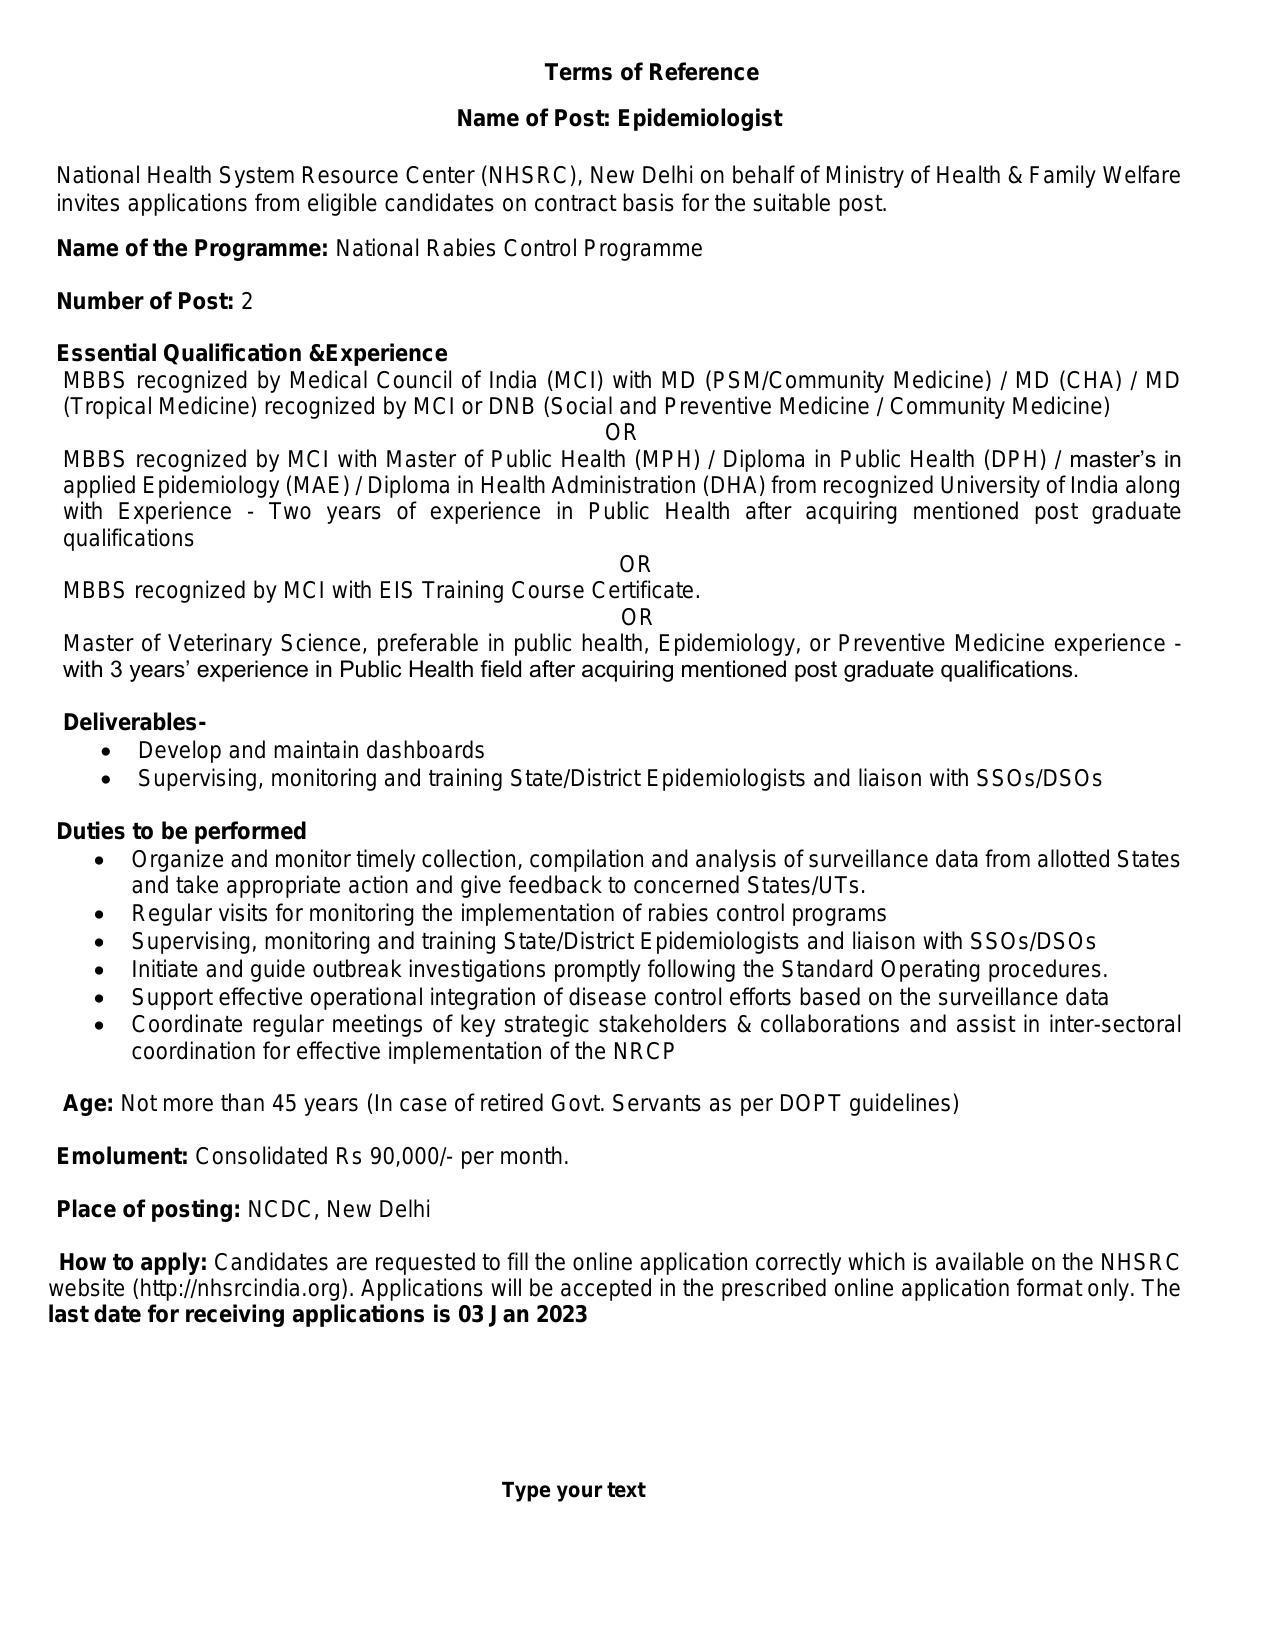 National Health Systems Resource Centre (NHSRC) Invites Application for Epidemiologist Recruitment 2022 - Page 2